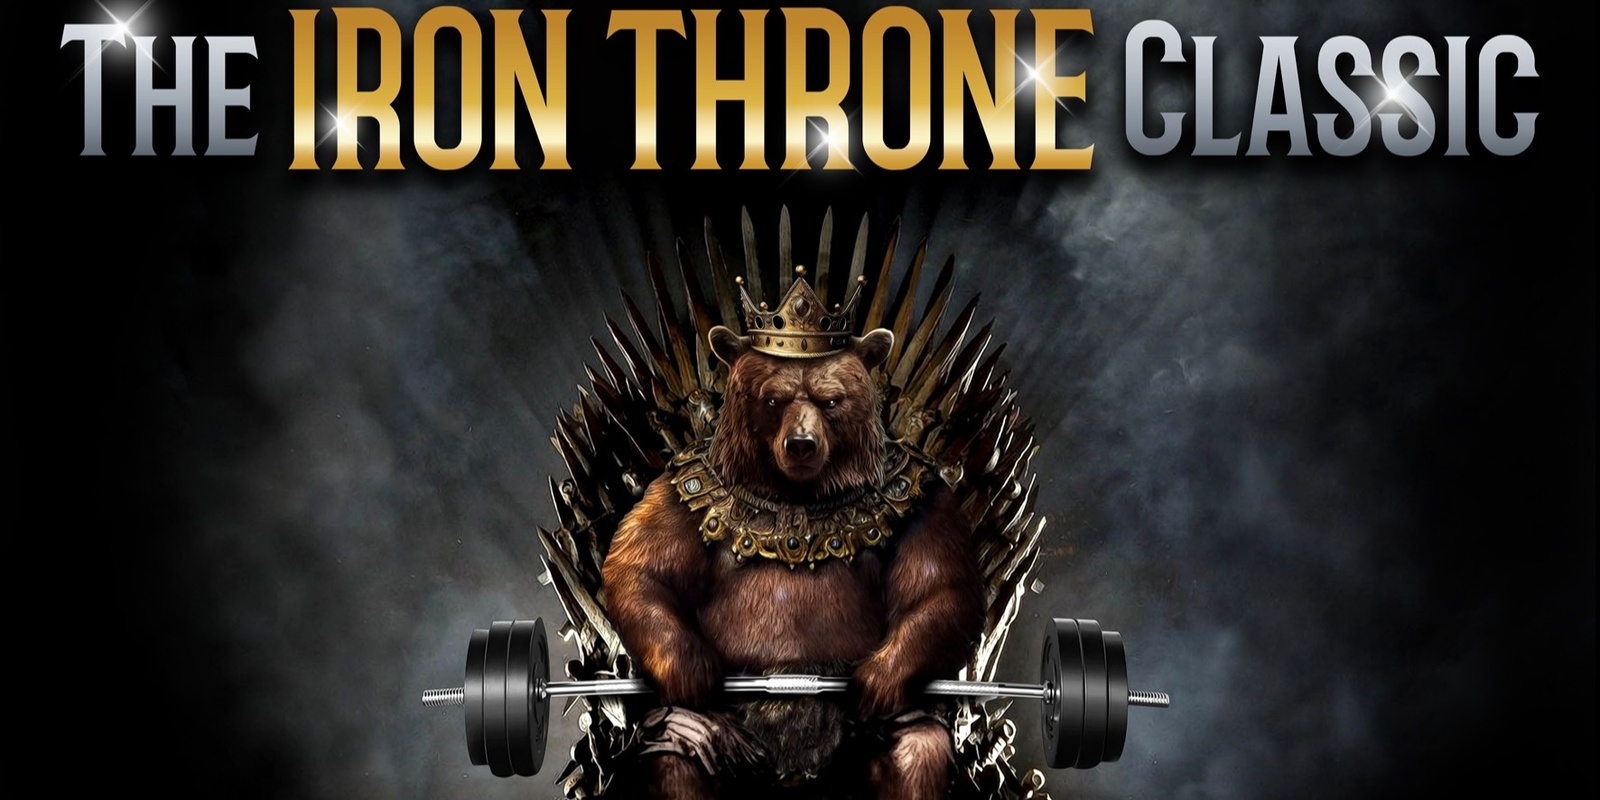 Banner image for The Iron Throne Classic